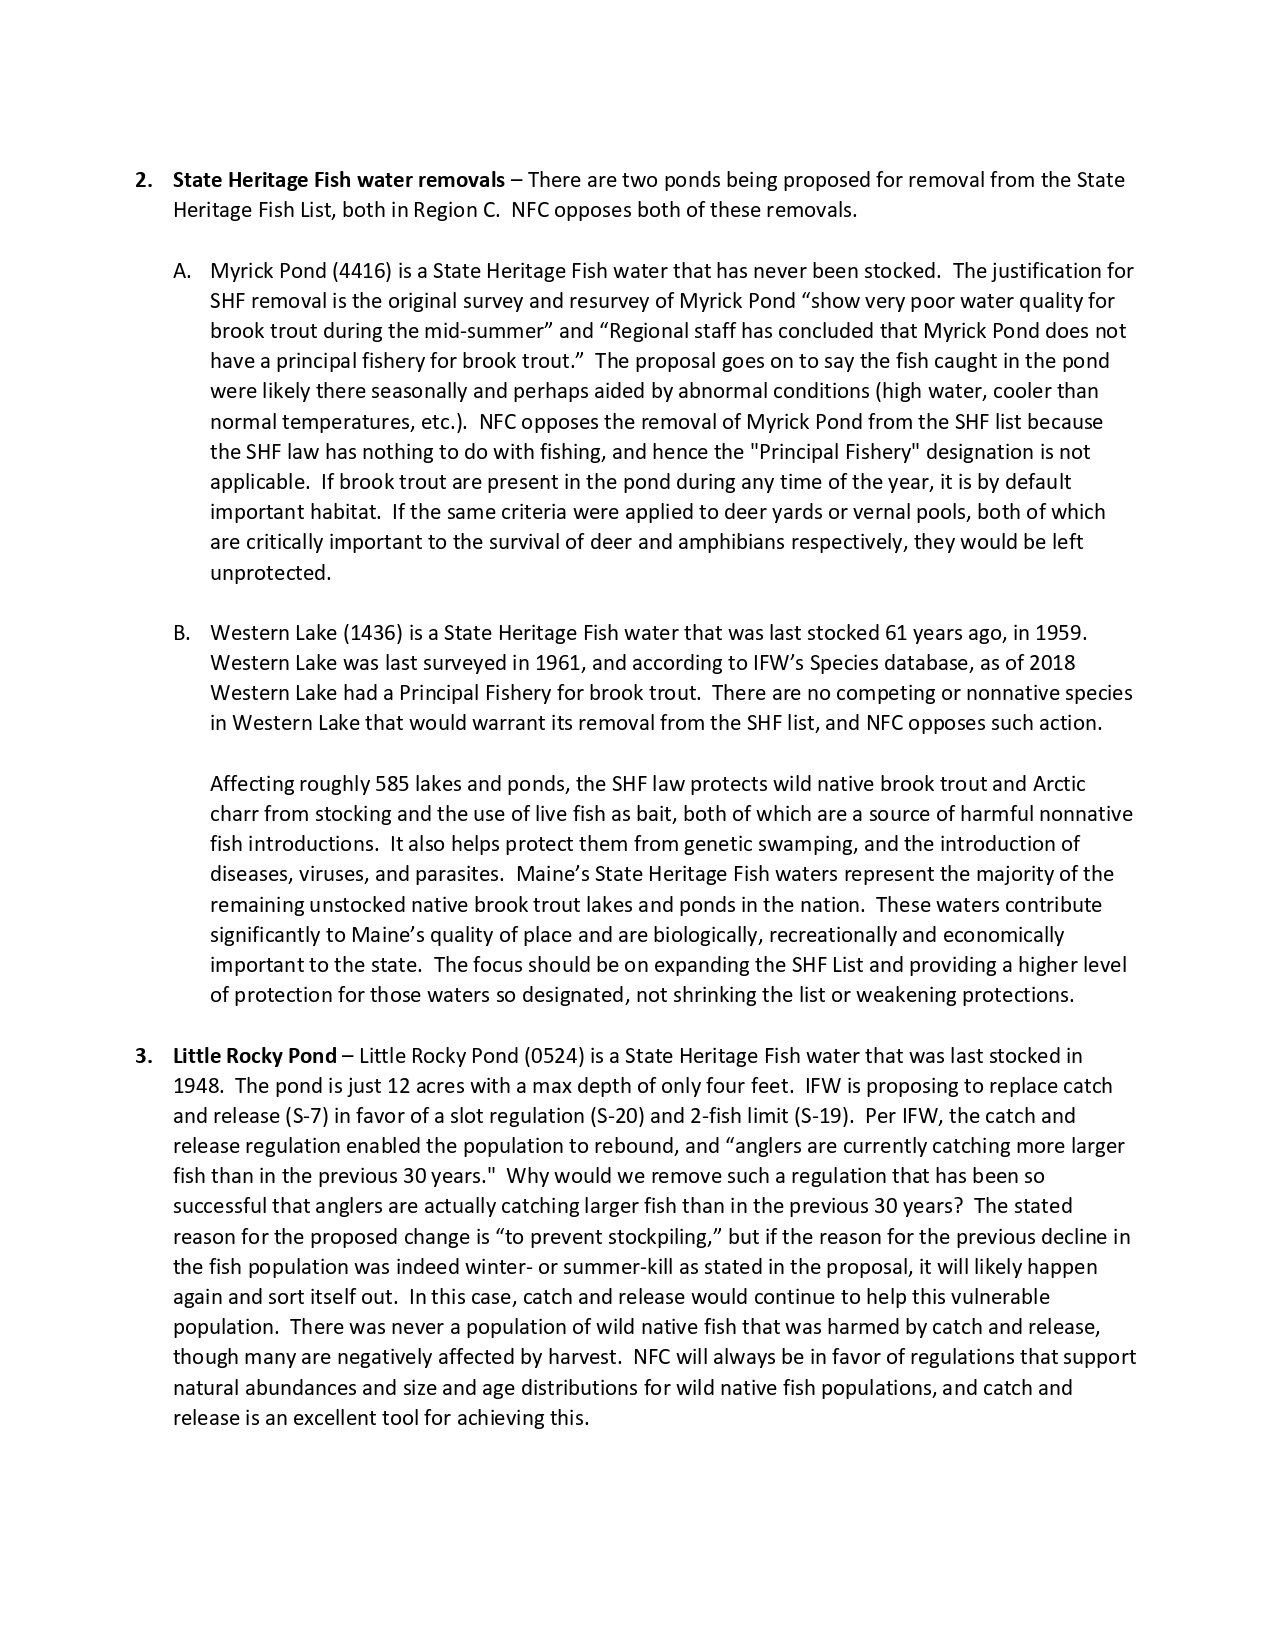 IFW Rulemaking 2020 - NFC Written Testimony_page-0002.jpg